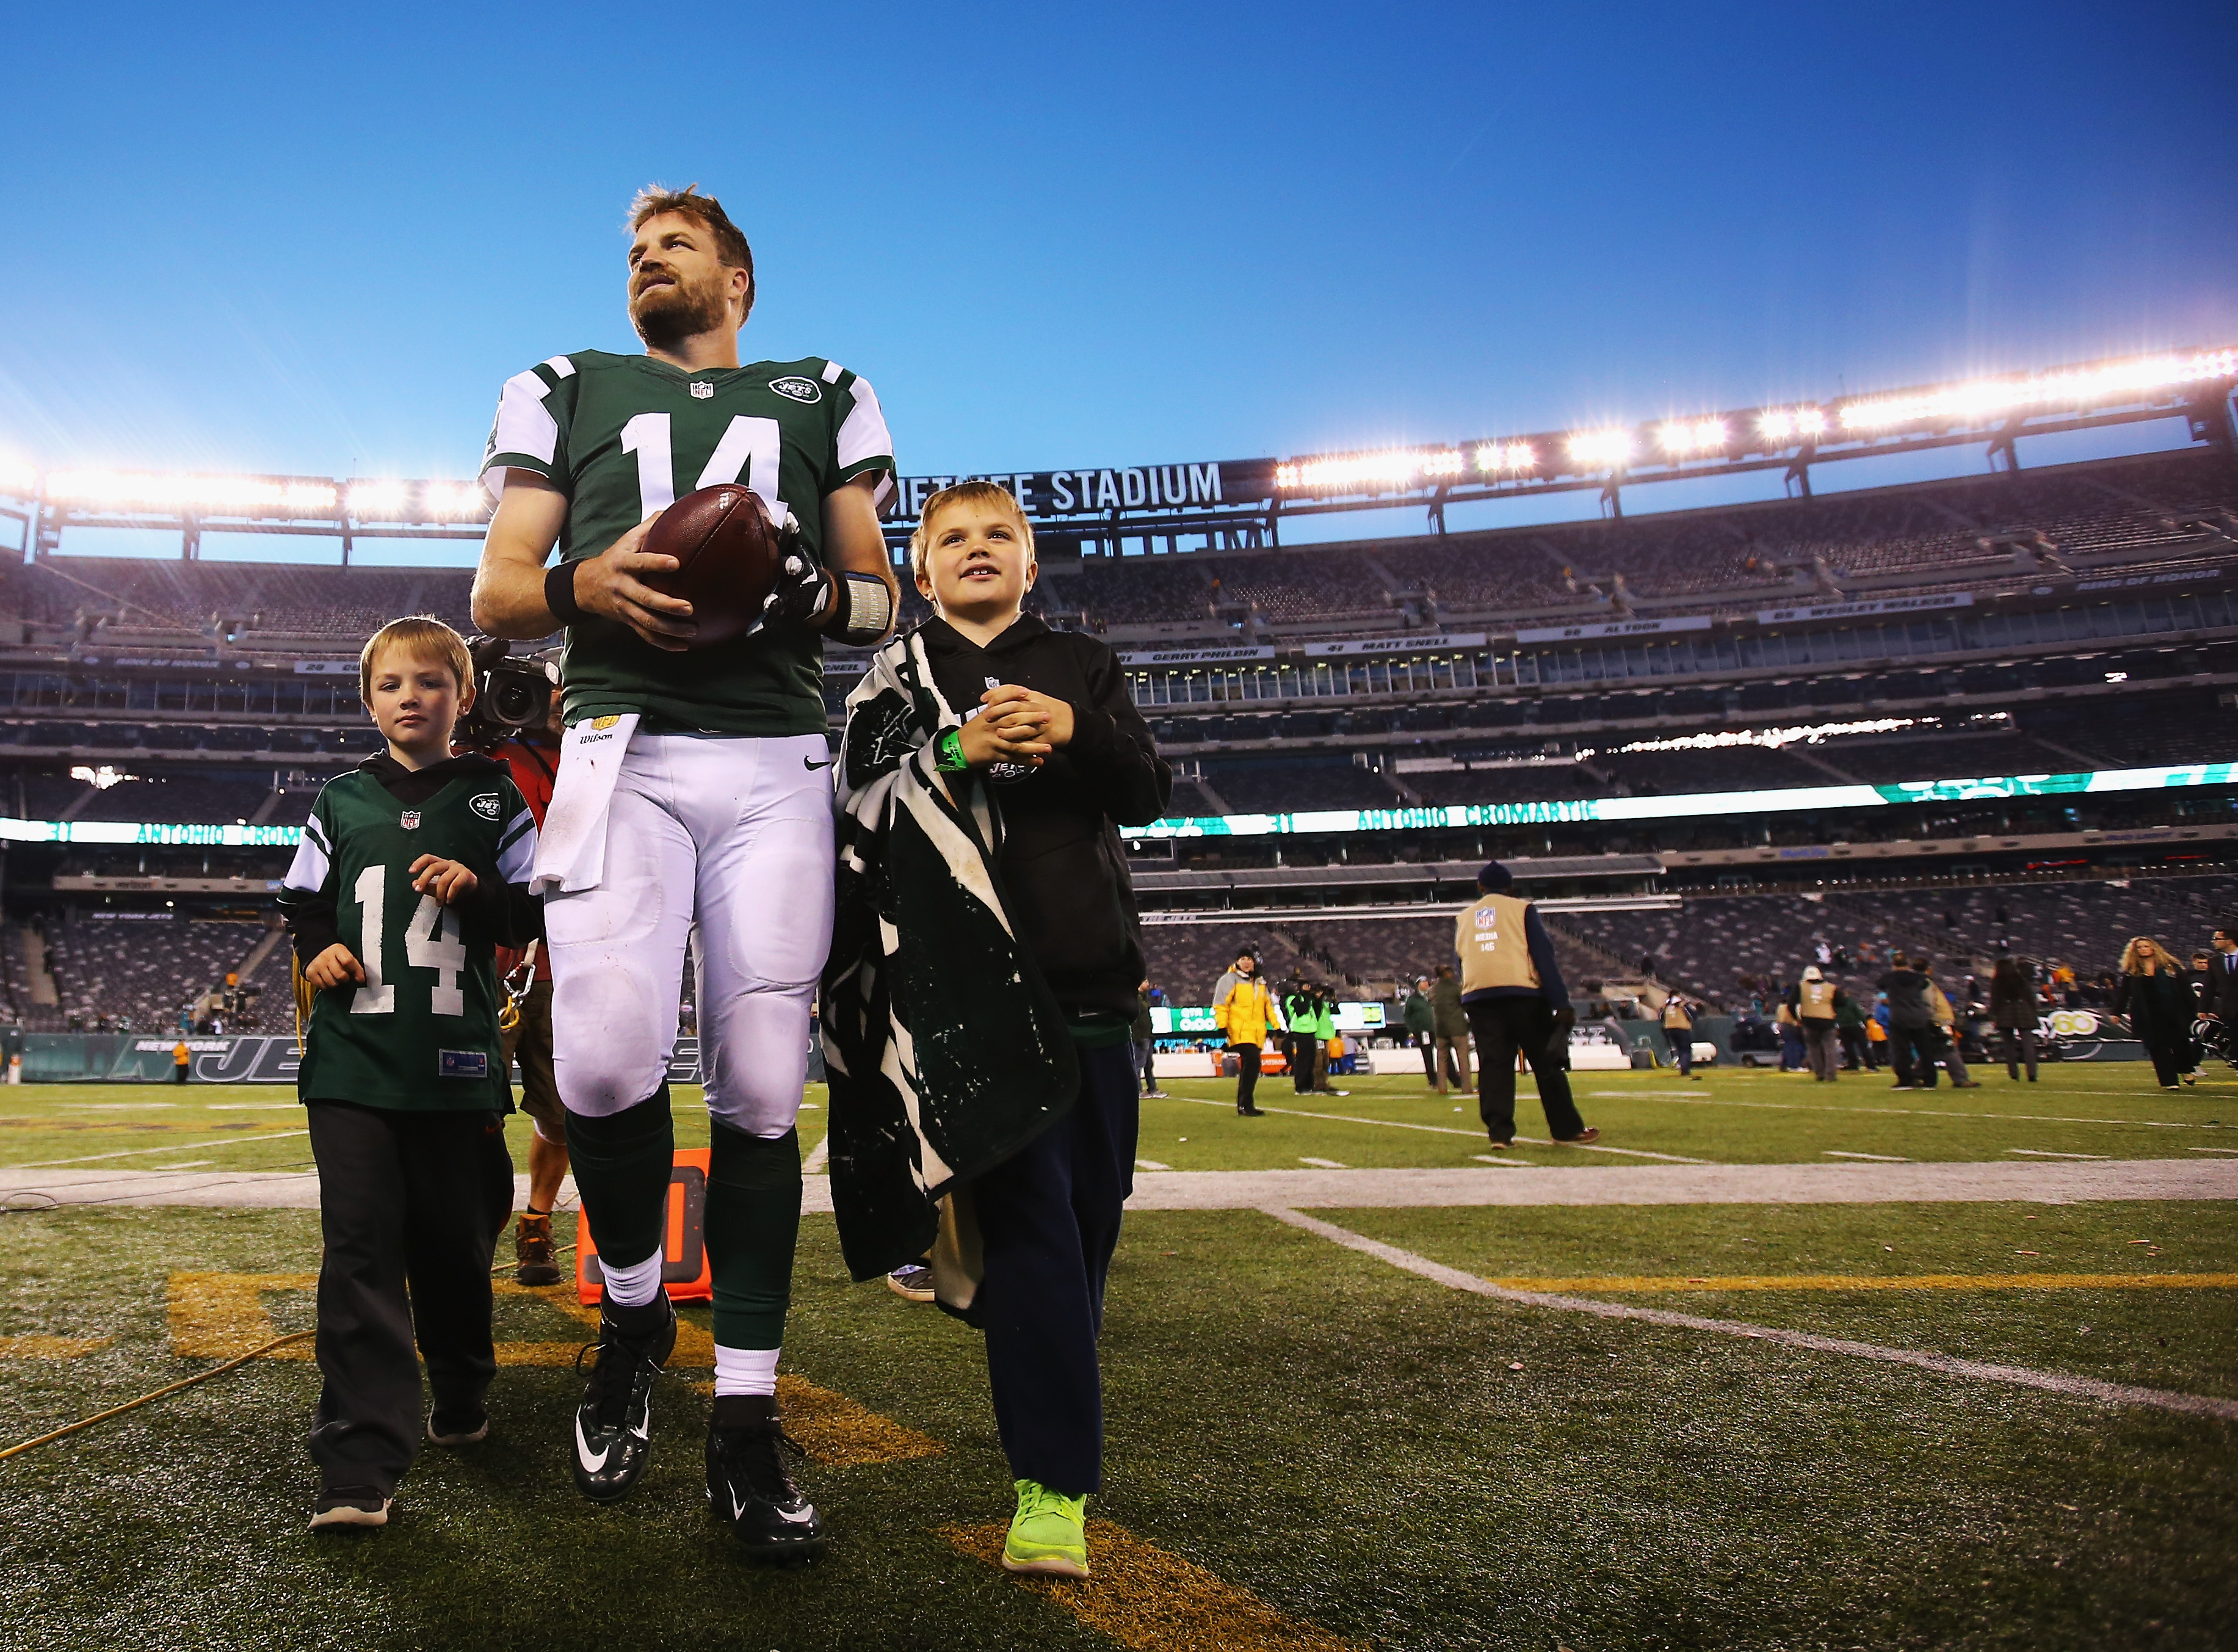 Ryan Fitzpatrick walks off the field with his children after a football game at MetLife Stadium on November 29, 2015, in East Rutherford, New Jersey | Source: Getty Images